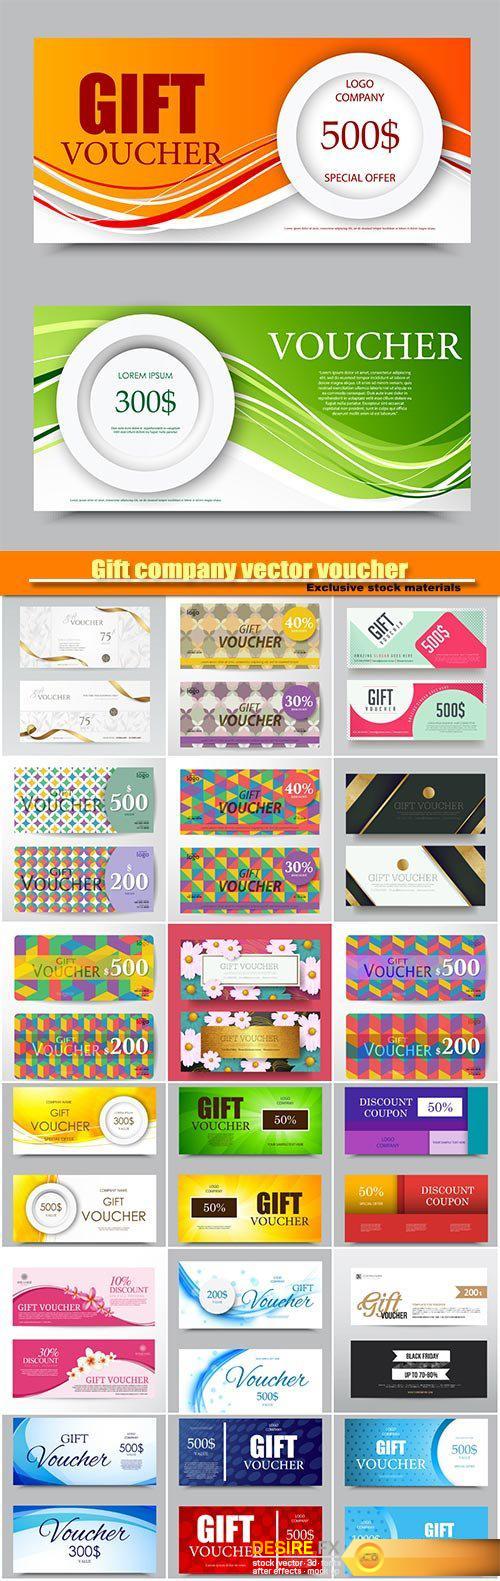 Gift company vector voucher template